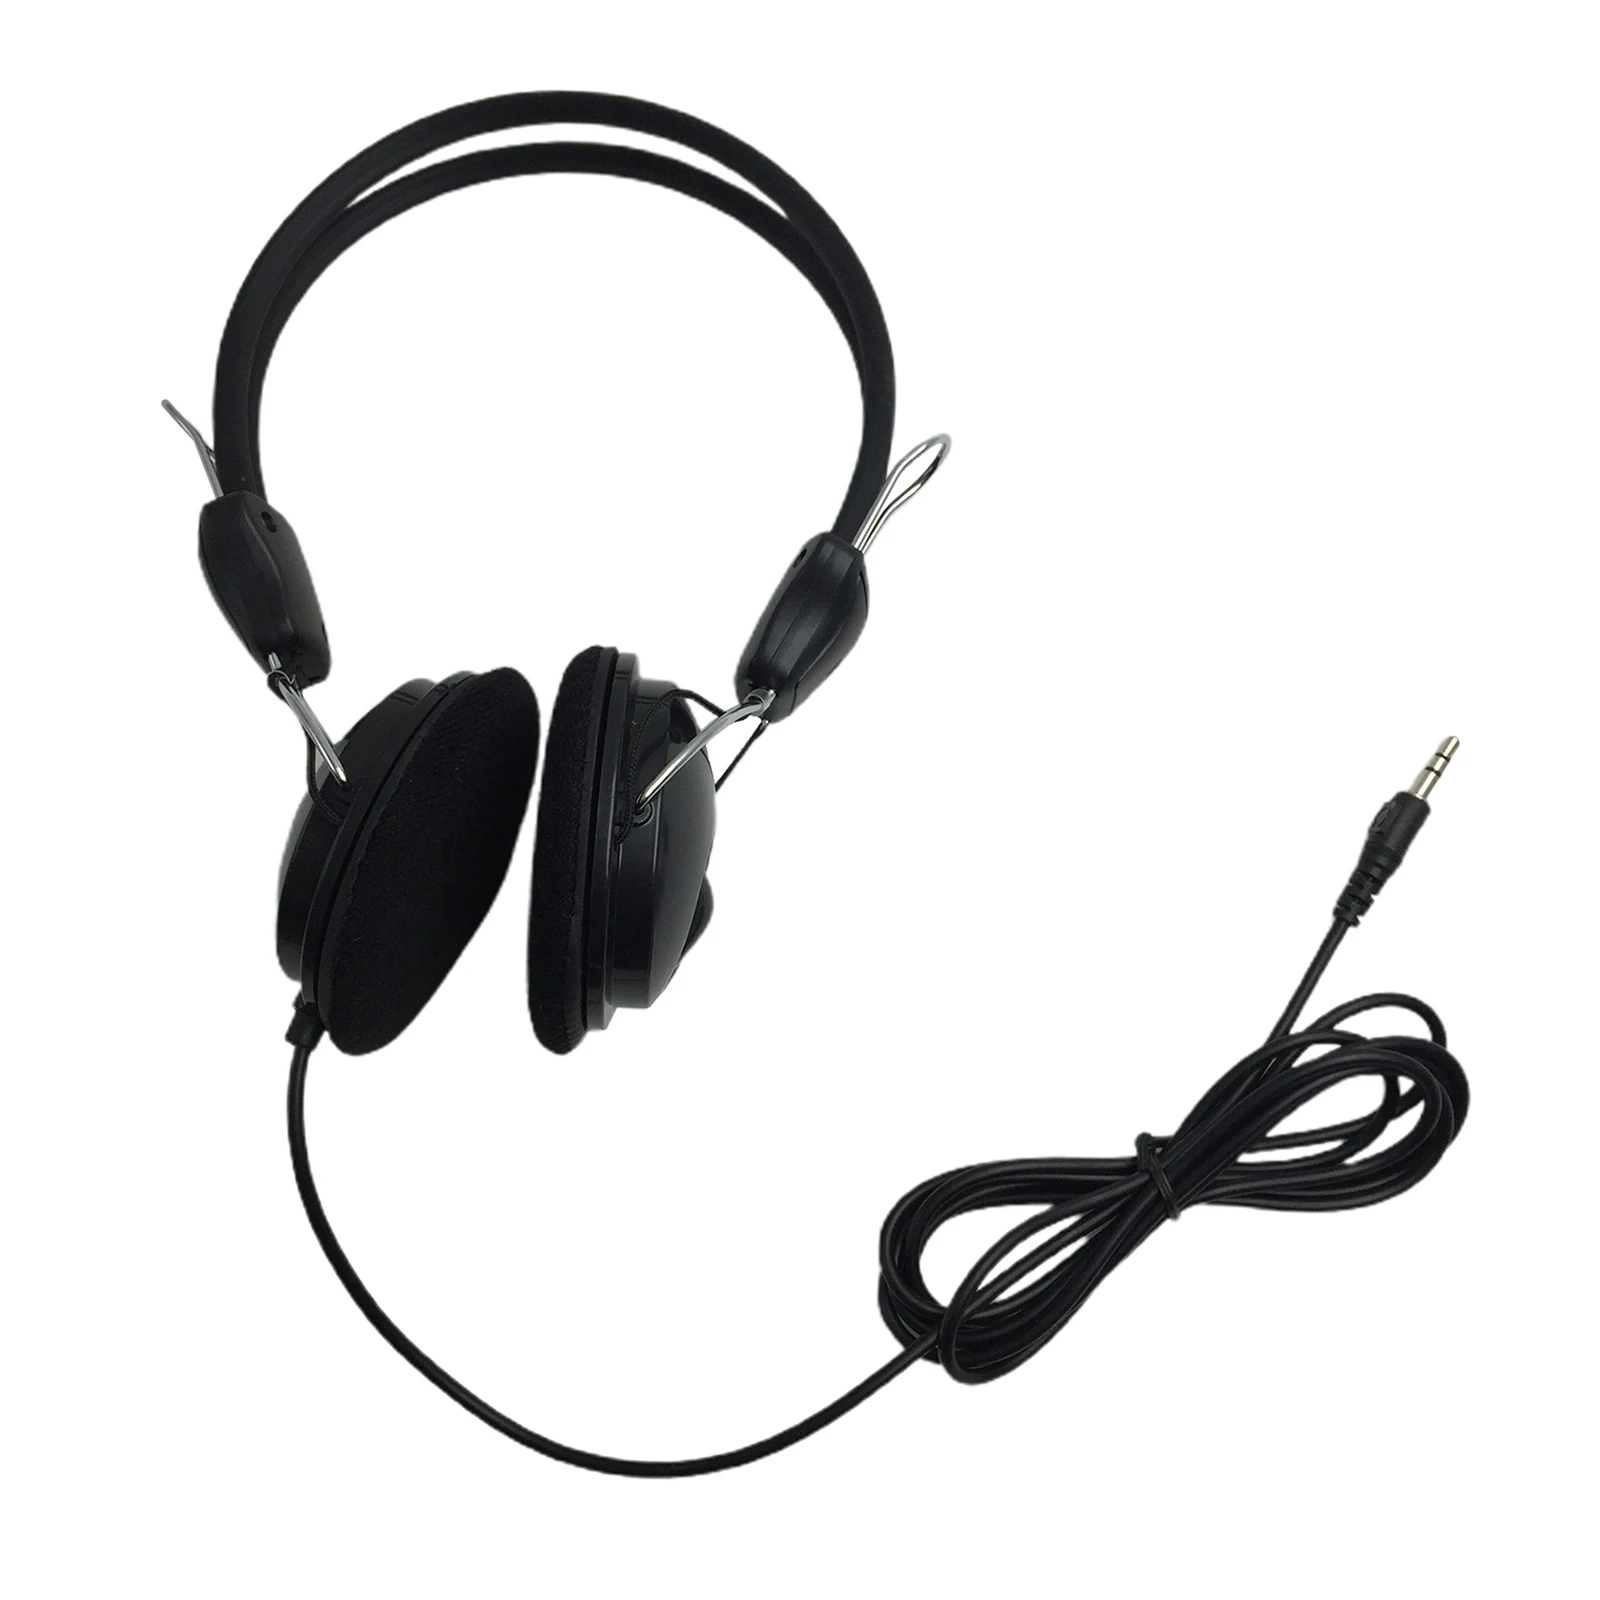 1 Piece Headphones for Metal Detector Detecting Portable and Lightweight Over Ear Headset Tool